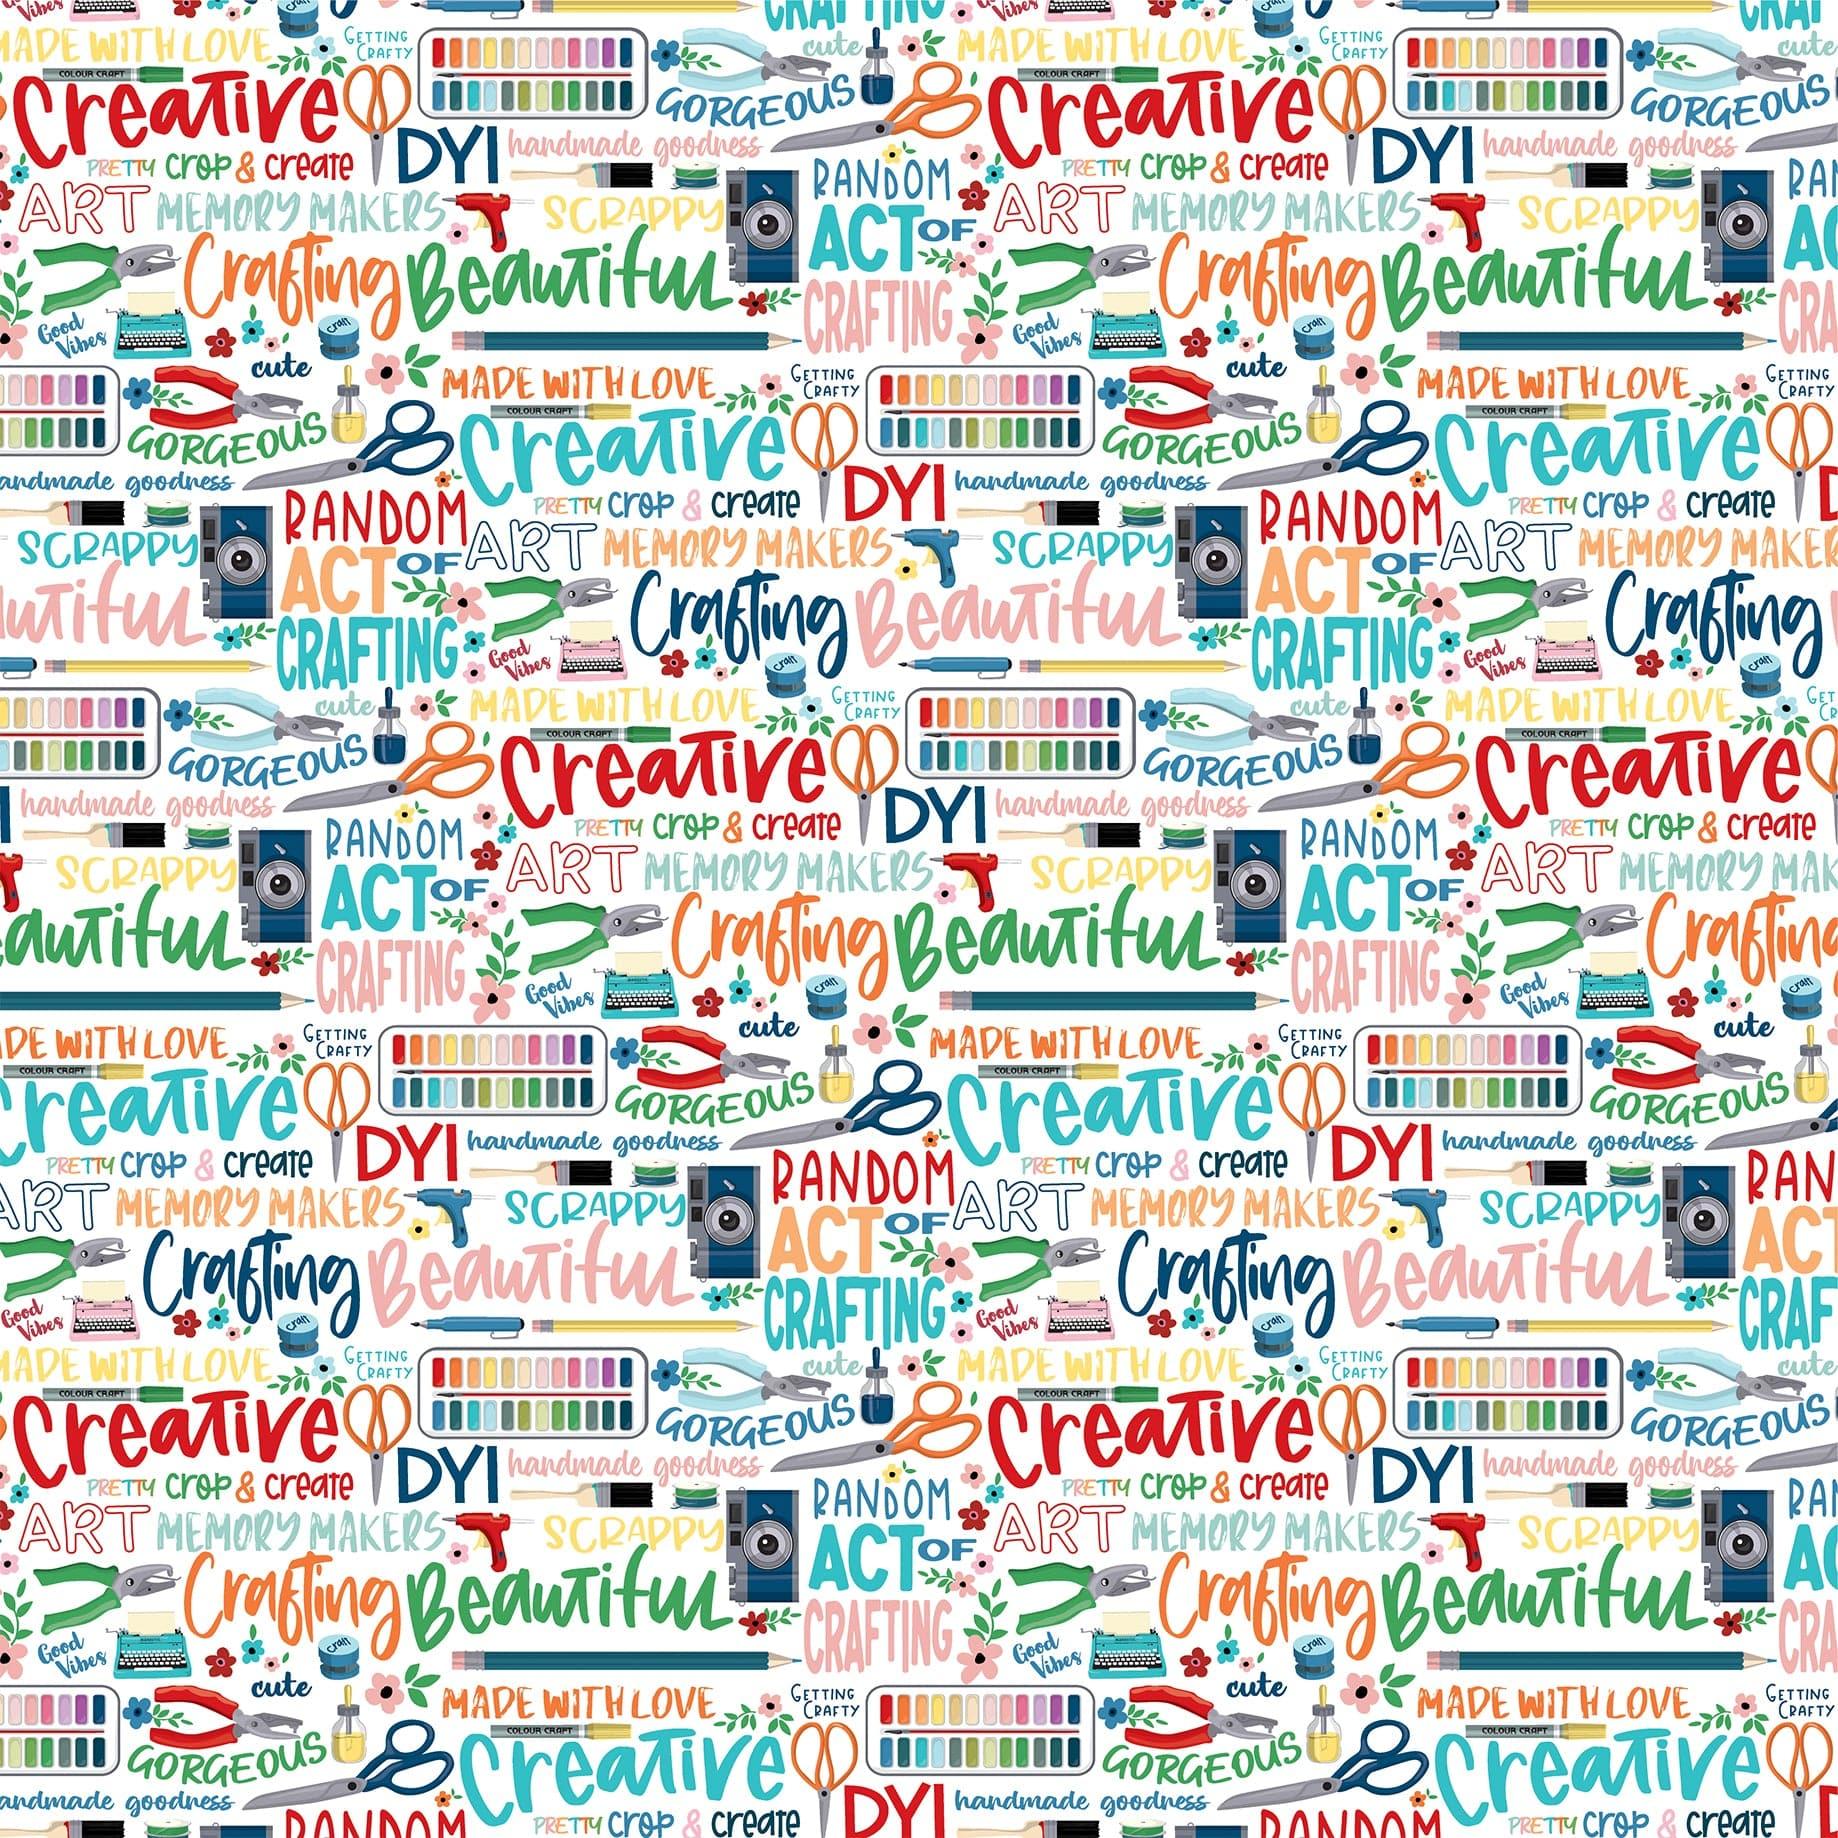 Happy Crafting Collection Creative Mind 12 x 12 Double-Sided Scrapbook Paper by Carta Bella - Scrapbook Supply Companies